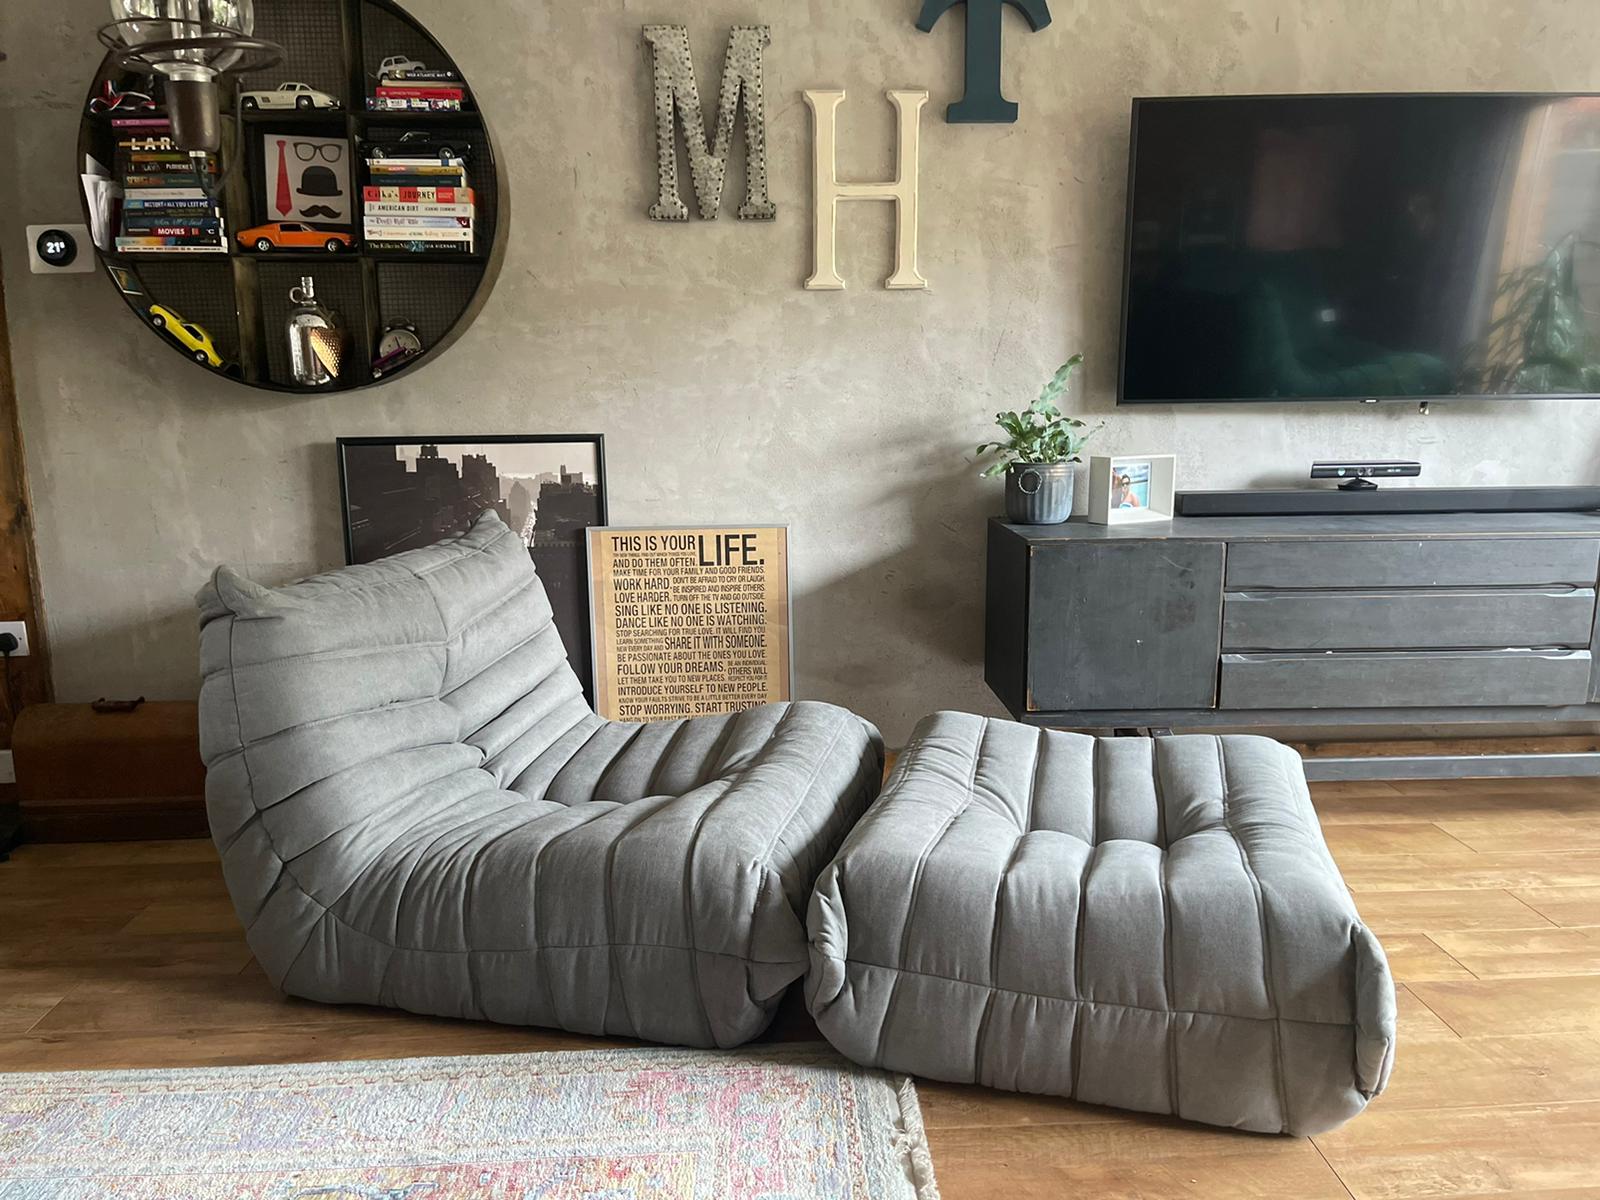 Togo Style Sofa 1 Seater Mid Grey With Footstool